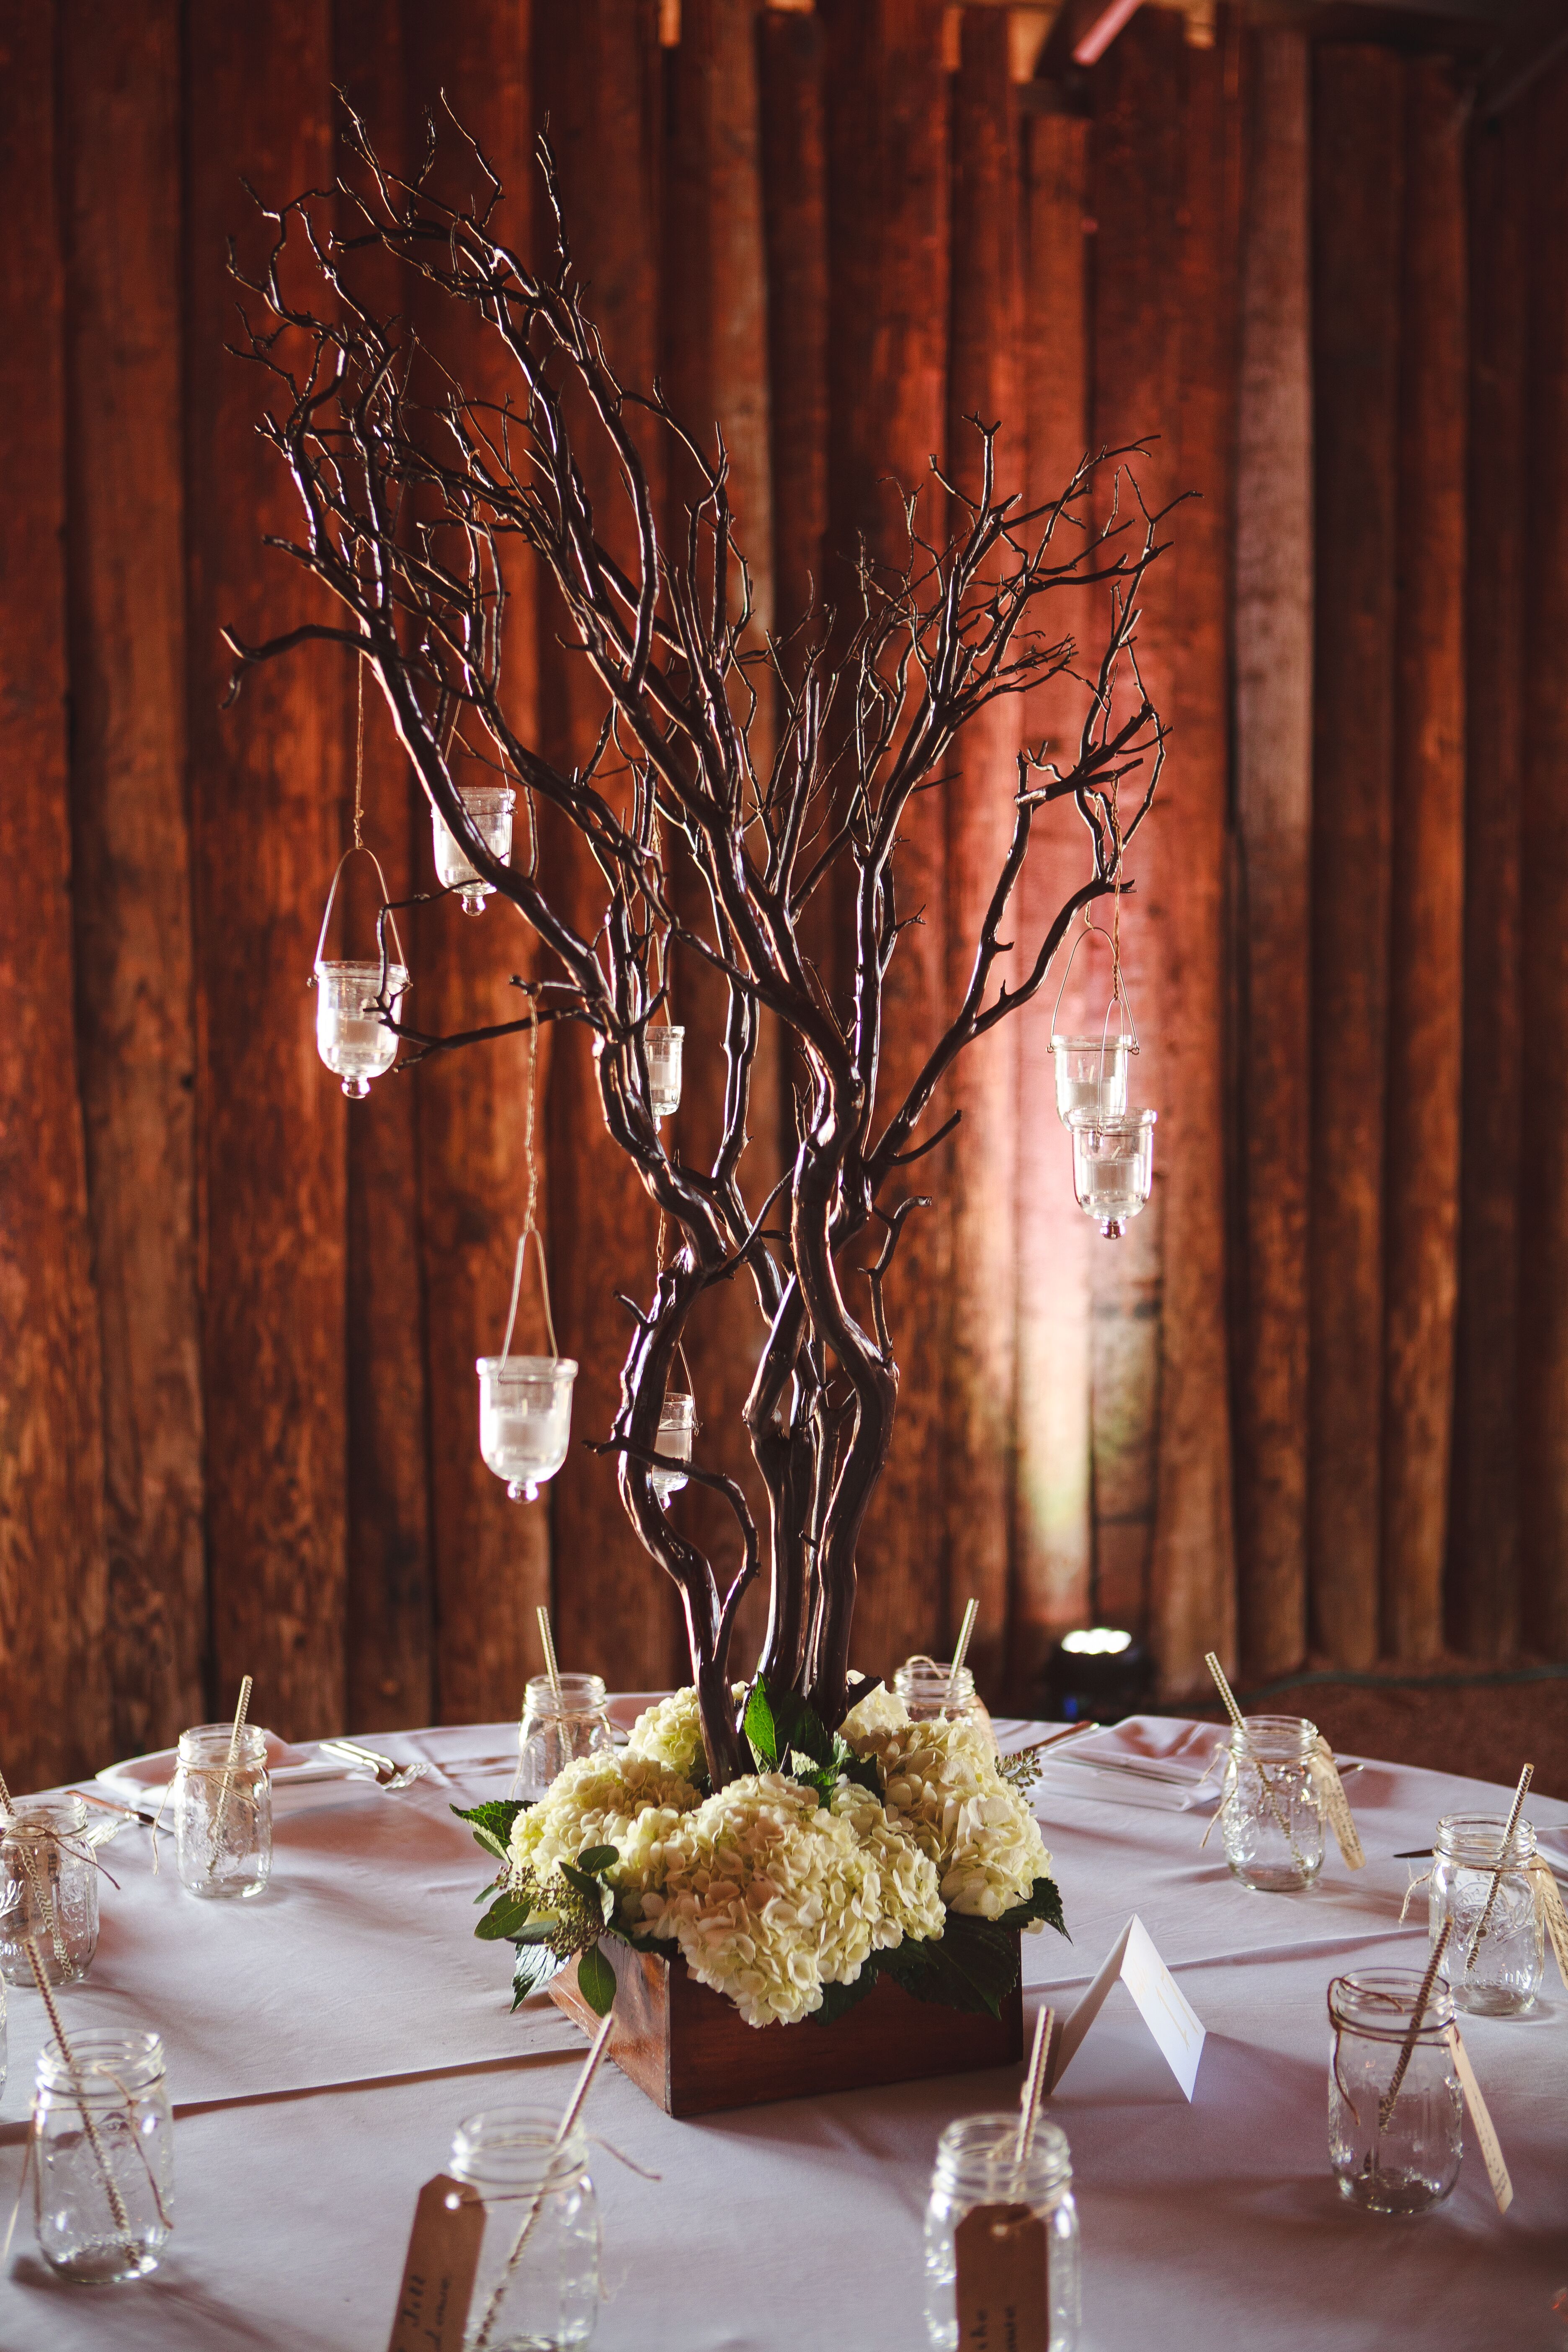 Manzanita Branch Centerpieces With Hanging Candles